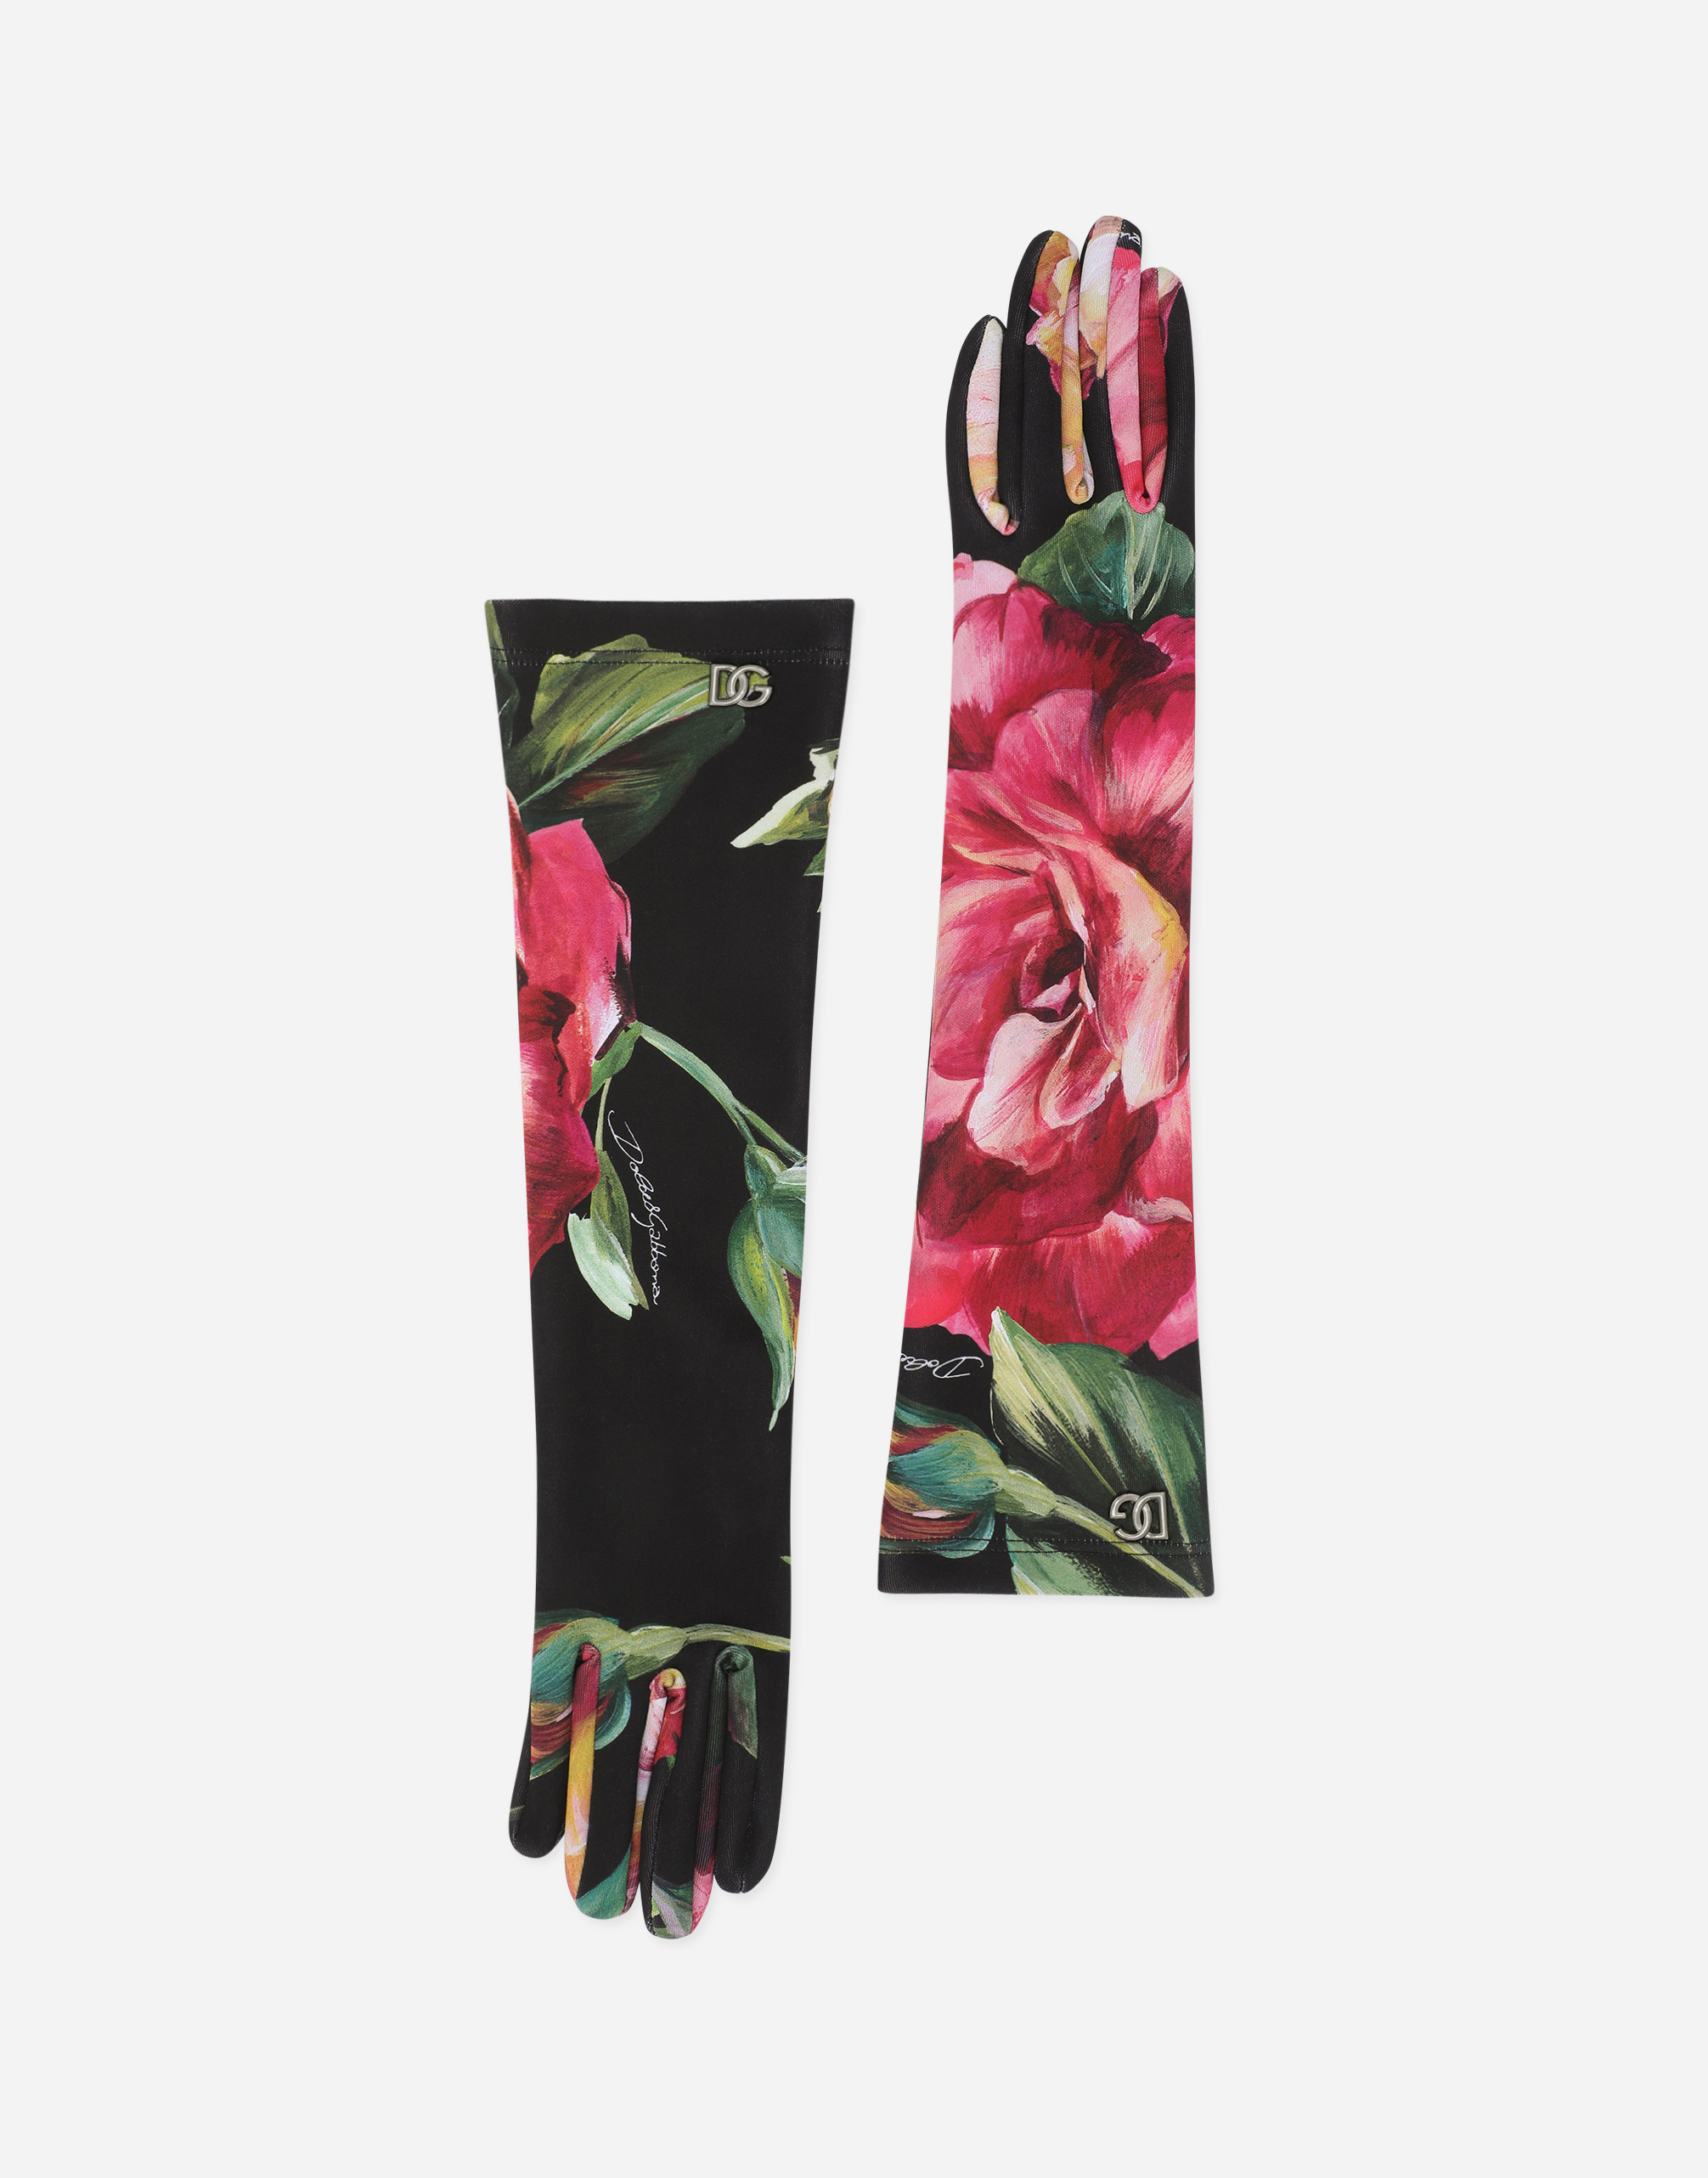 Rose-print jersey gloves with DG logo in Multicolor